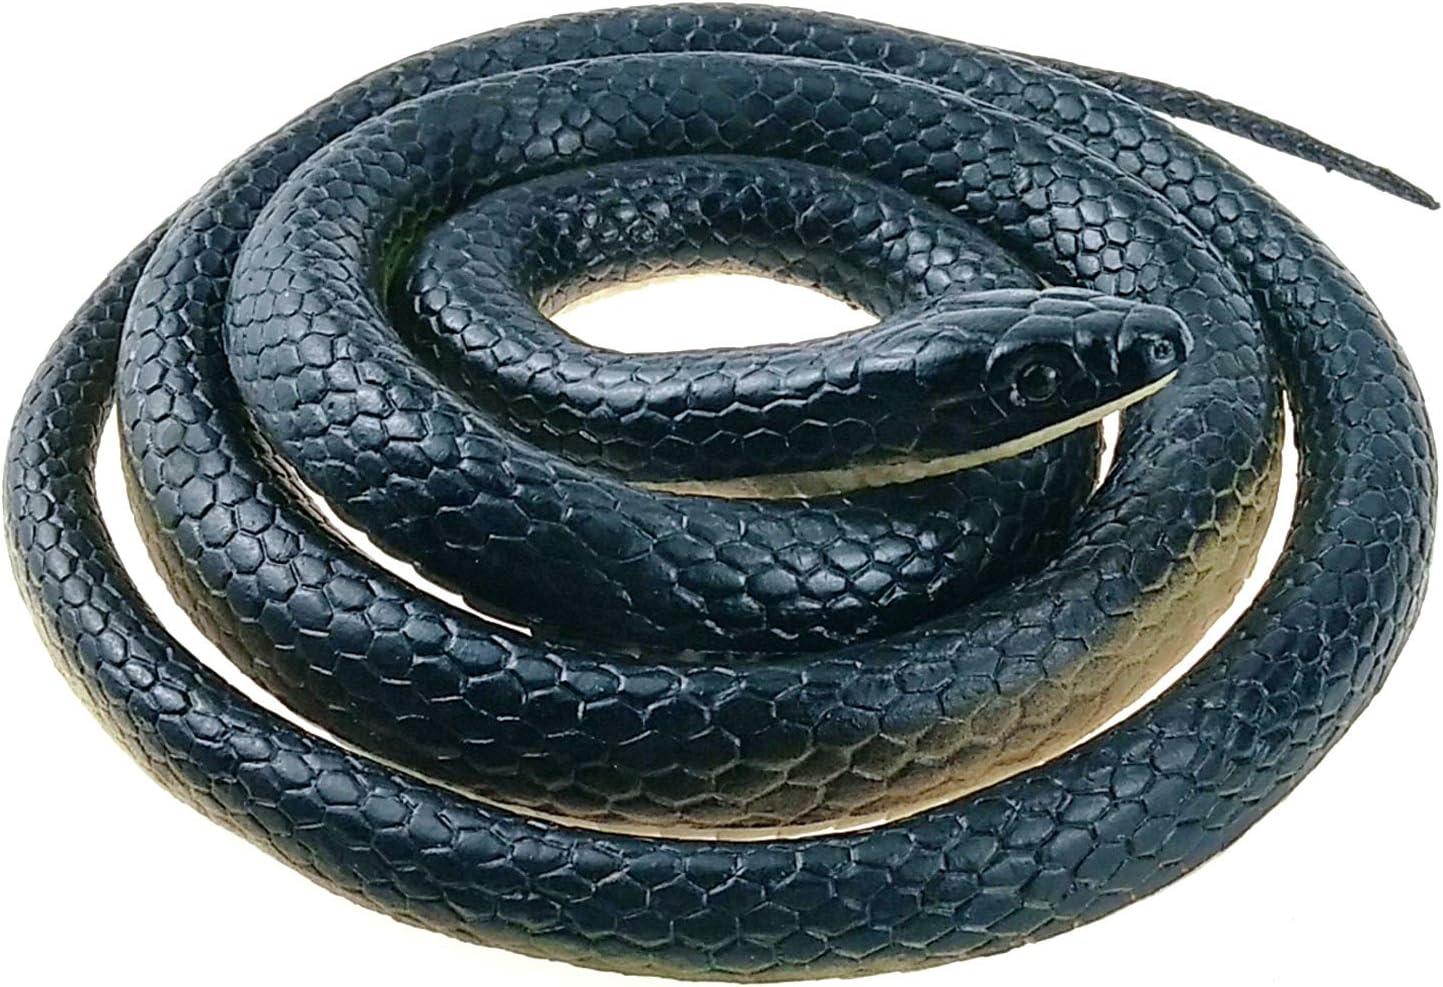 Looking to Buy The Best Toy Rubber Snakes on Amazon. Here are 10 Key Things to Consider